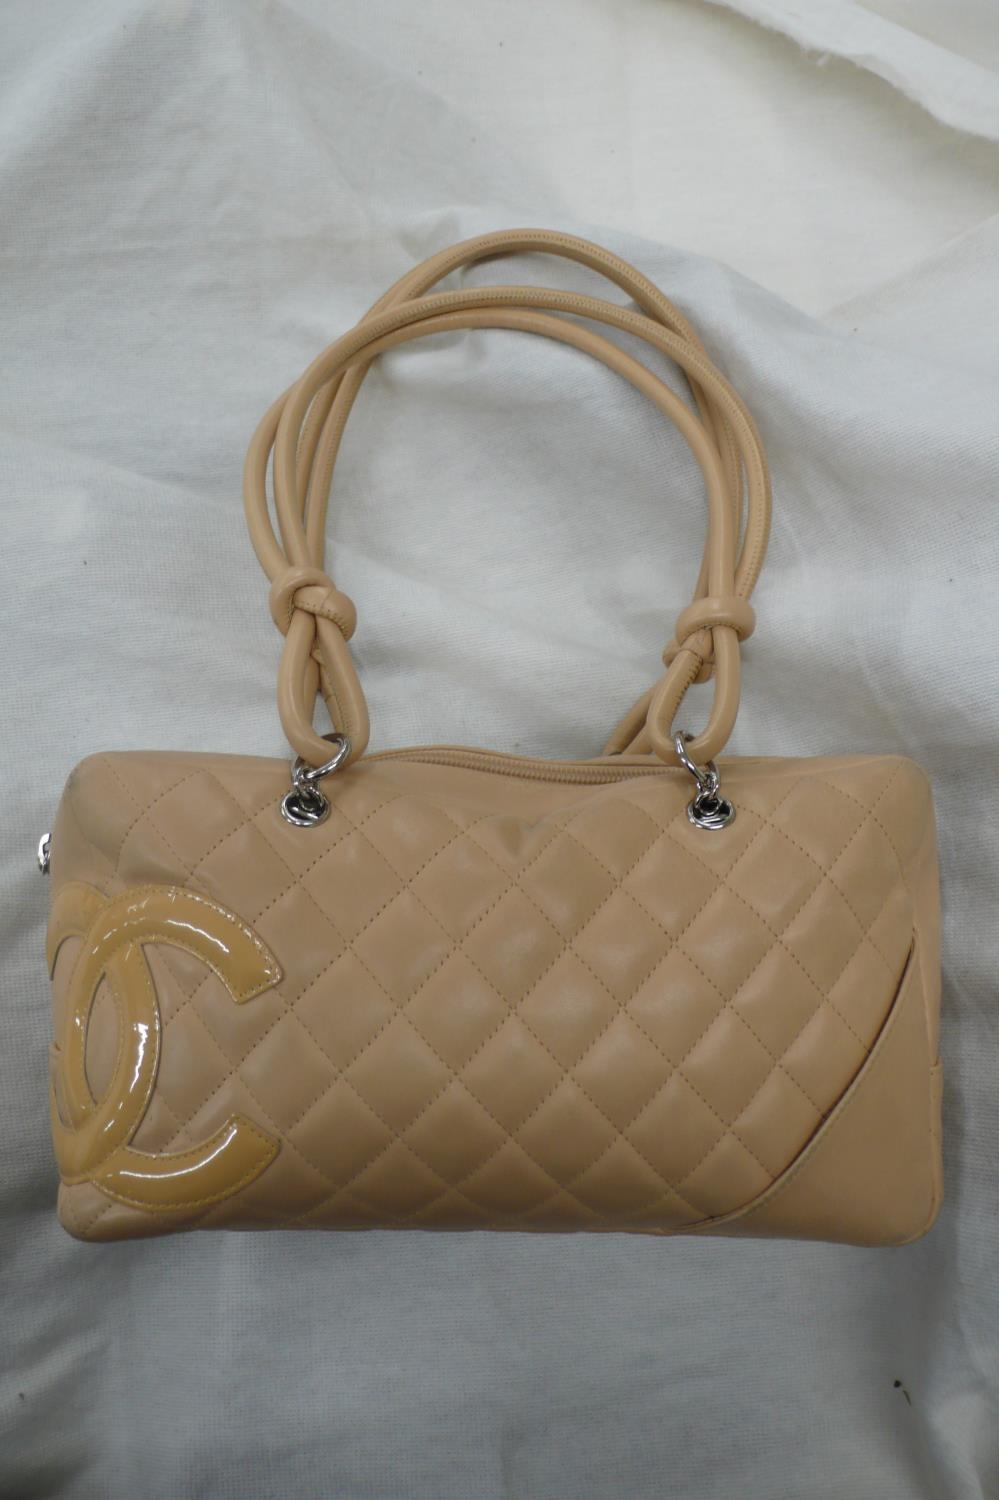 Chanel quilted peach leather handbag with patent leather logo, knot and loop handles, chrome